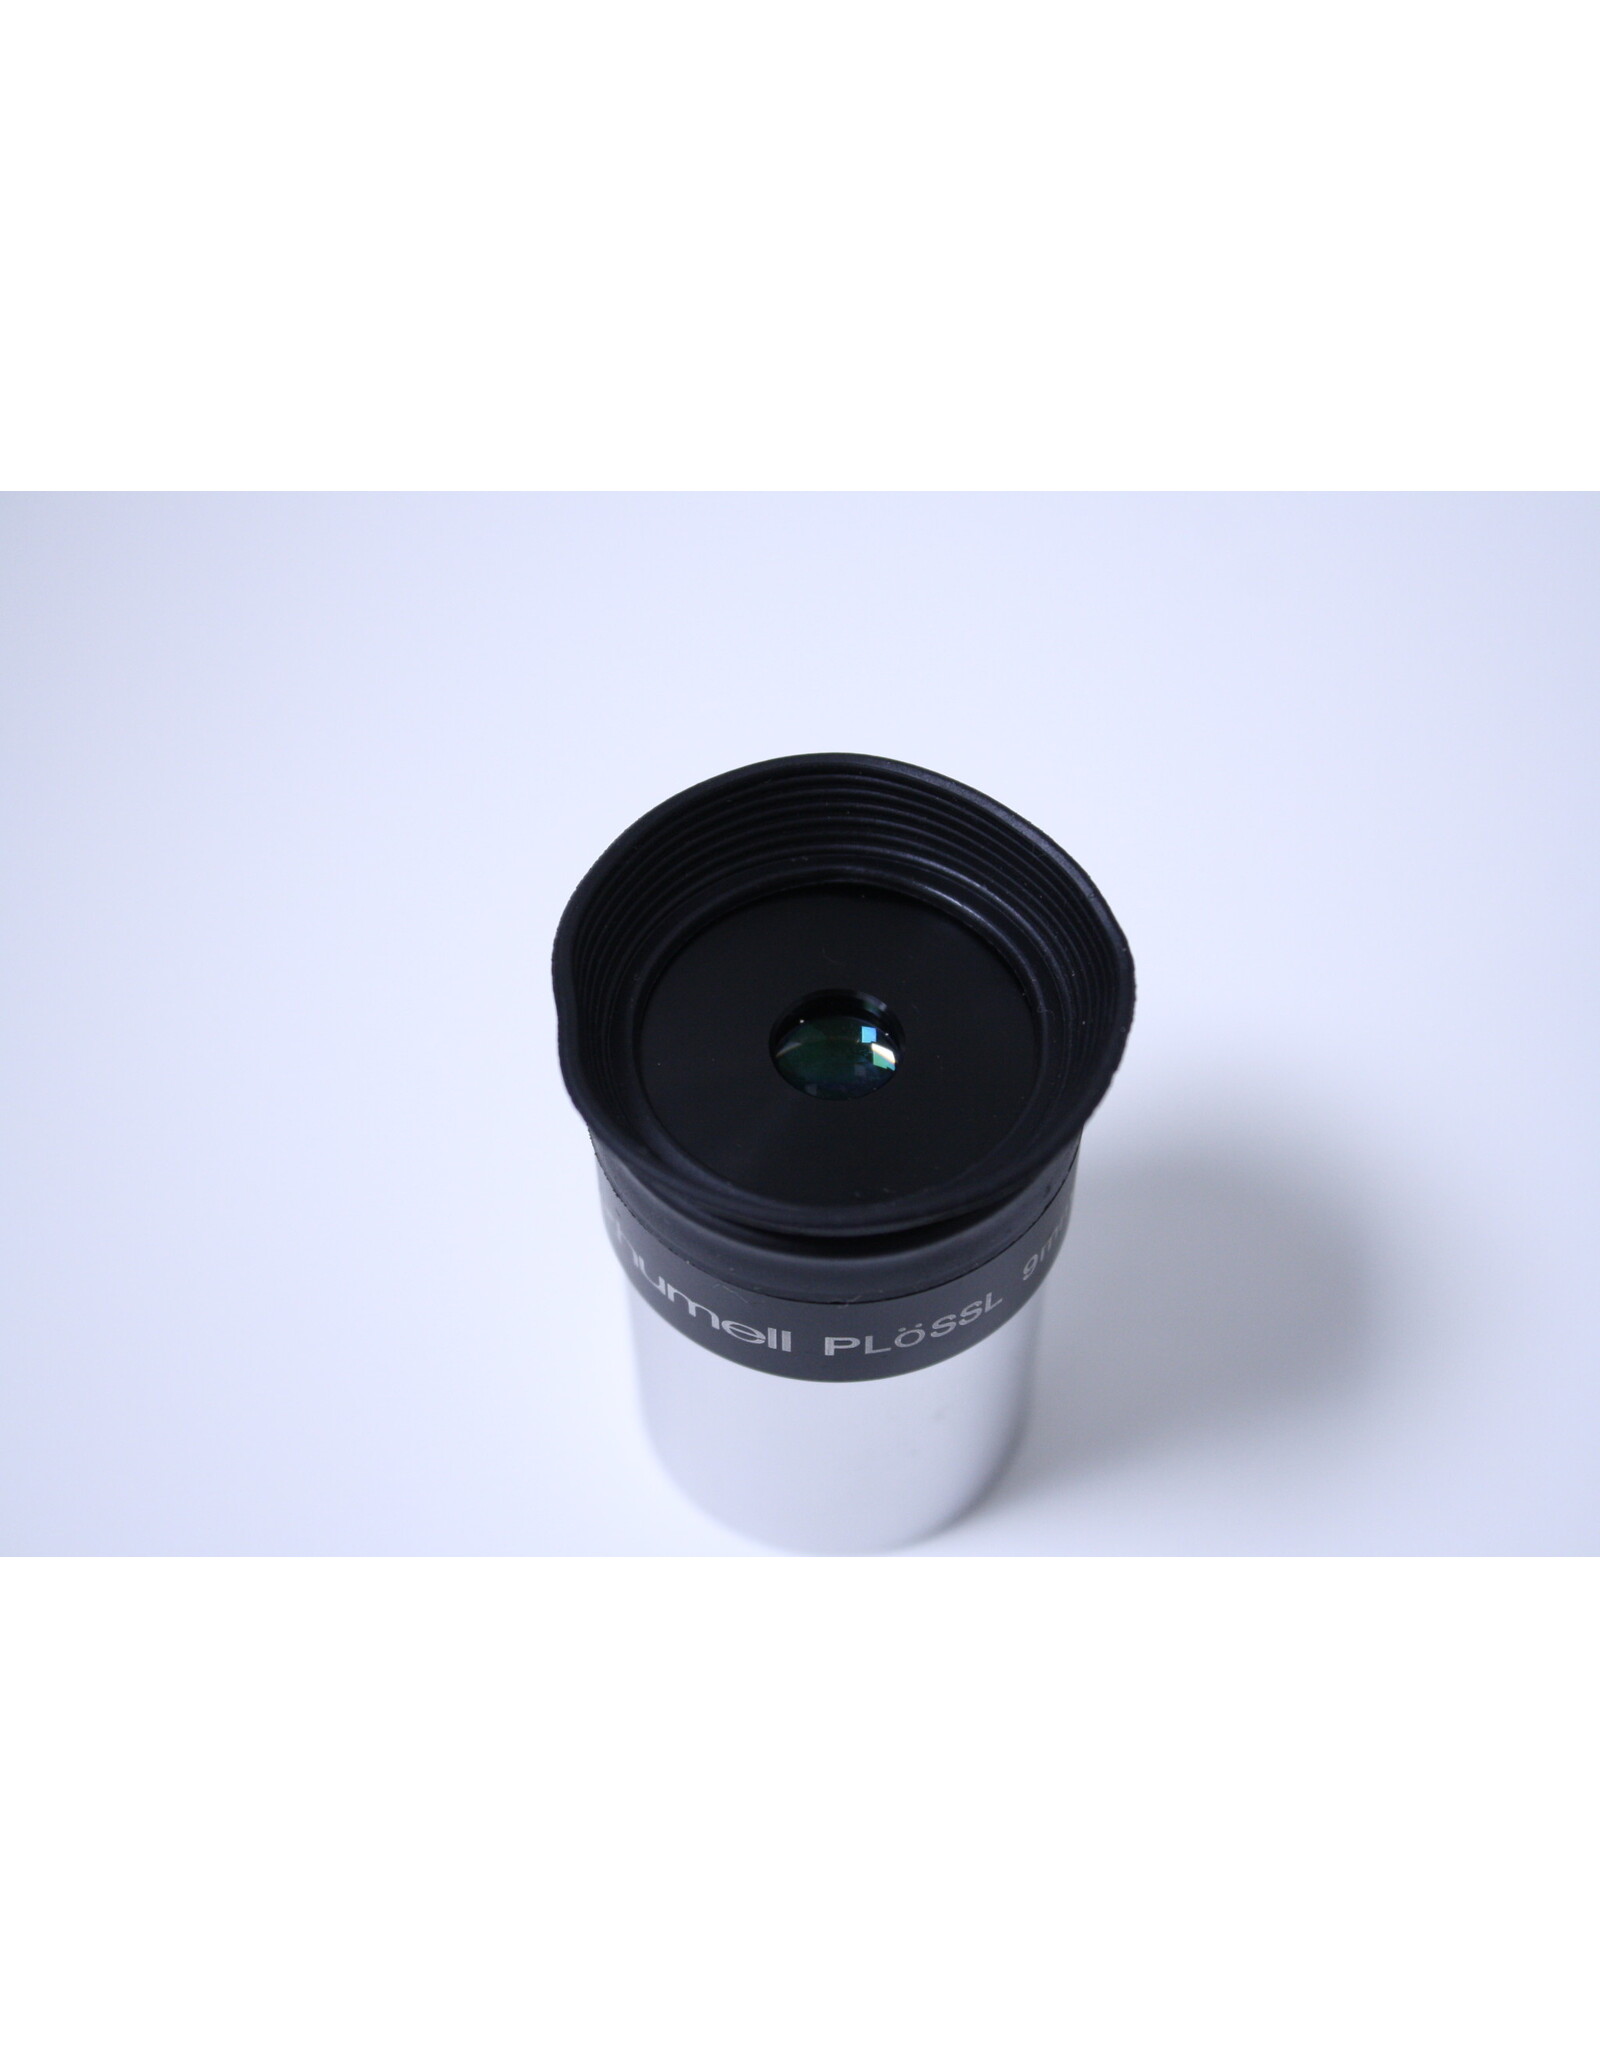 Zhumell Zhumell Superview 9mm 1.25 Inch Eyepiece